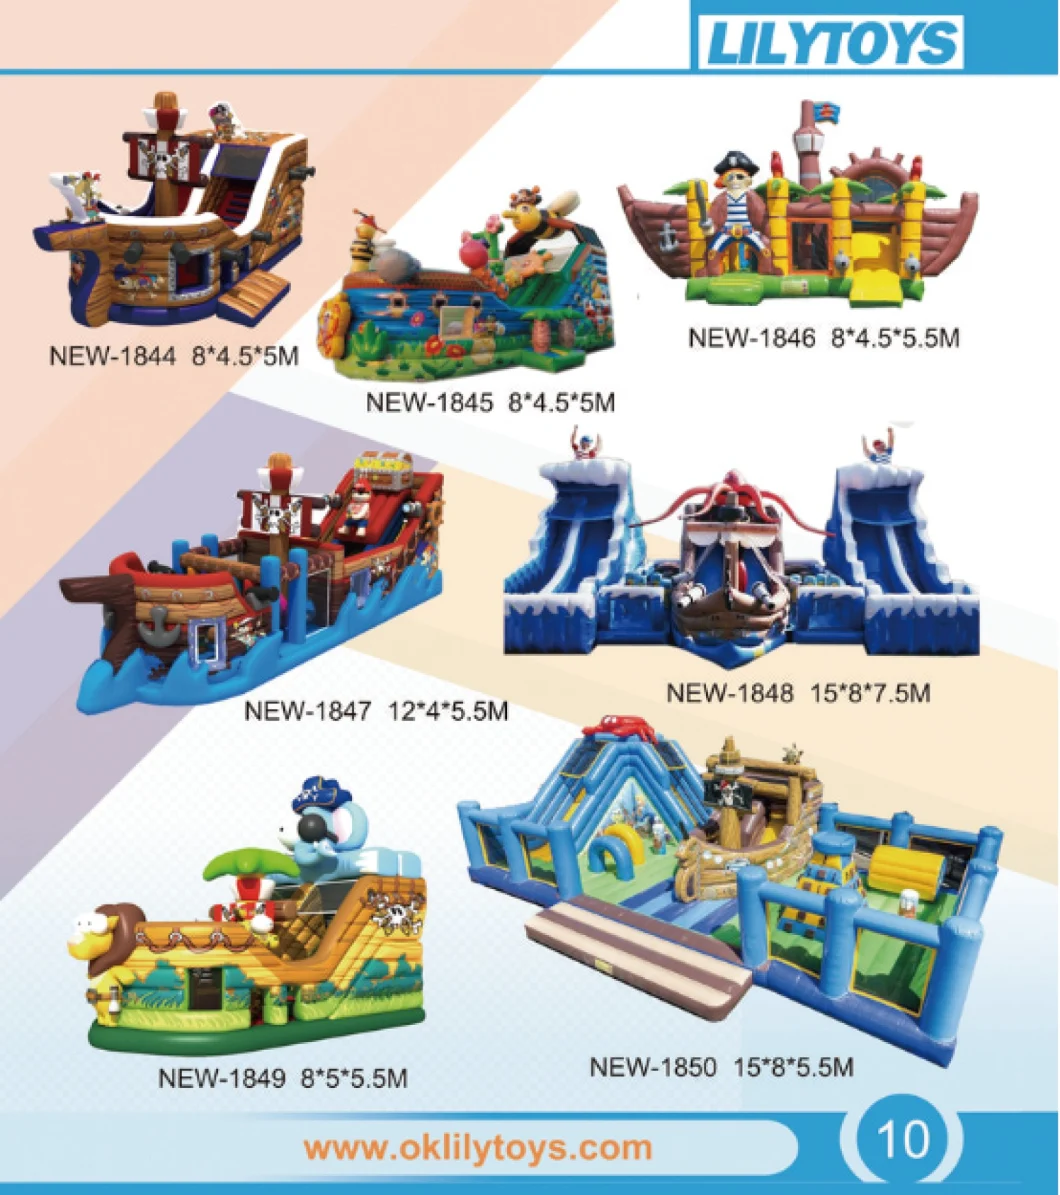 2019 New Design Inflatable Slide Equipment for Kids, Inflatable Fun City, Climbing Trampoline Fun World